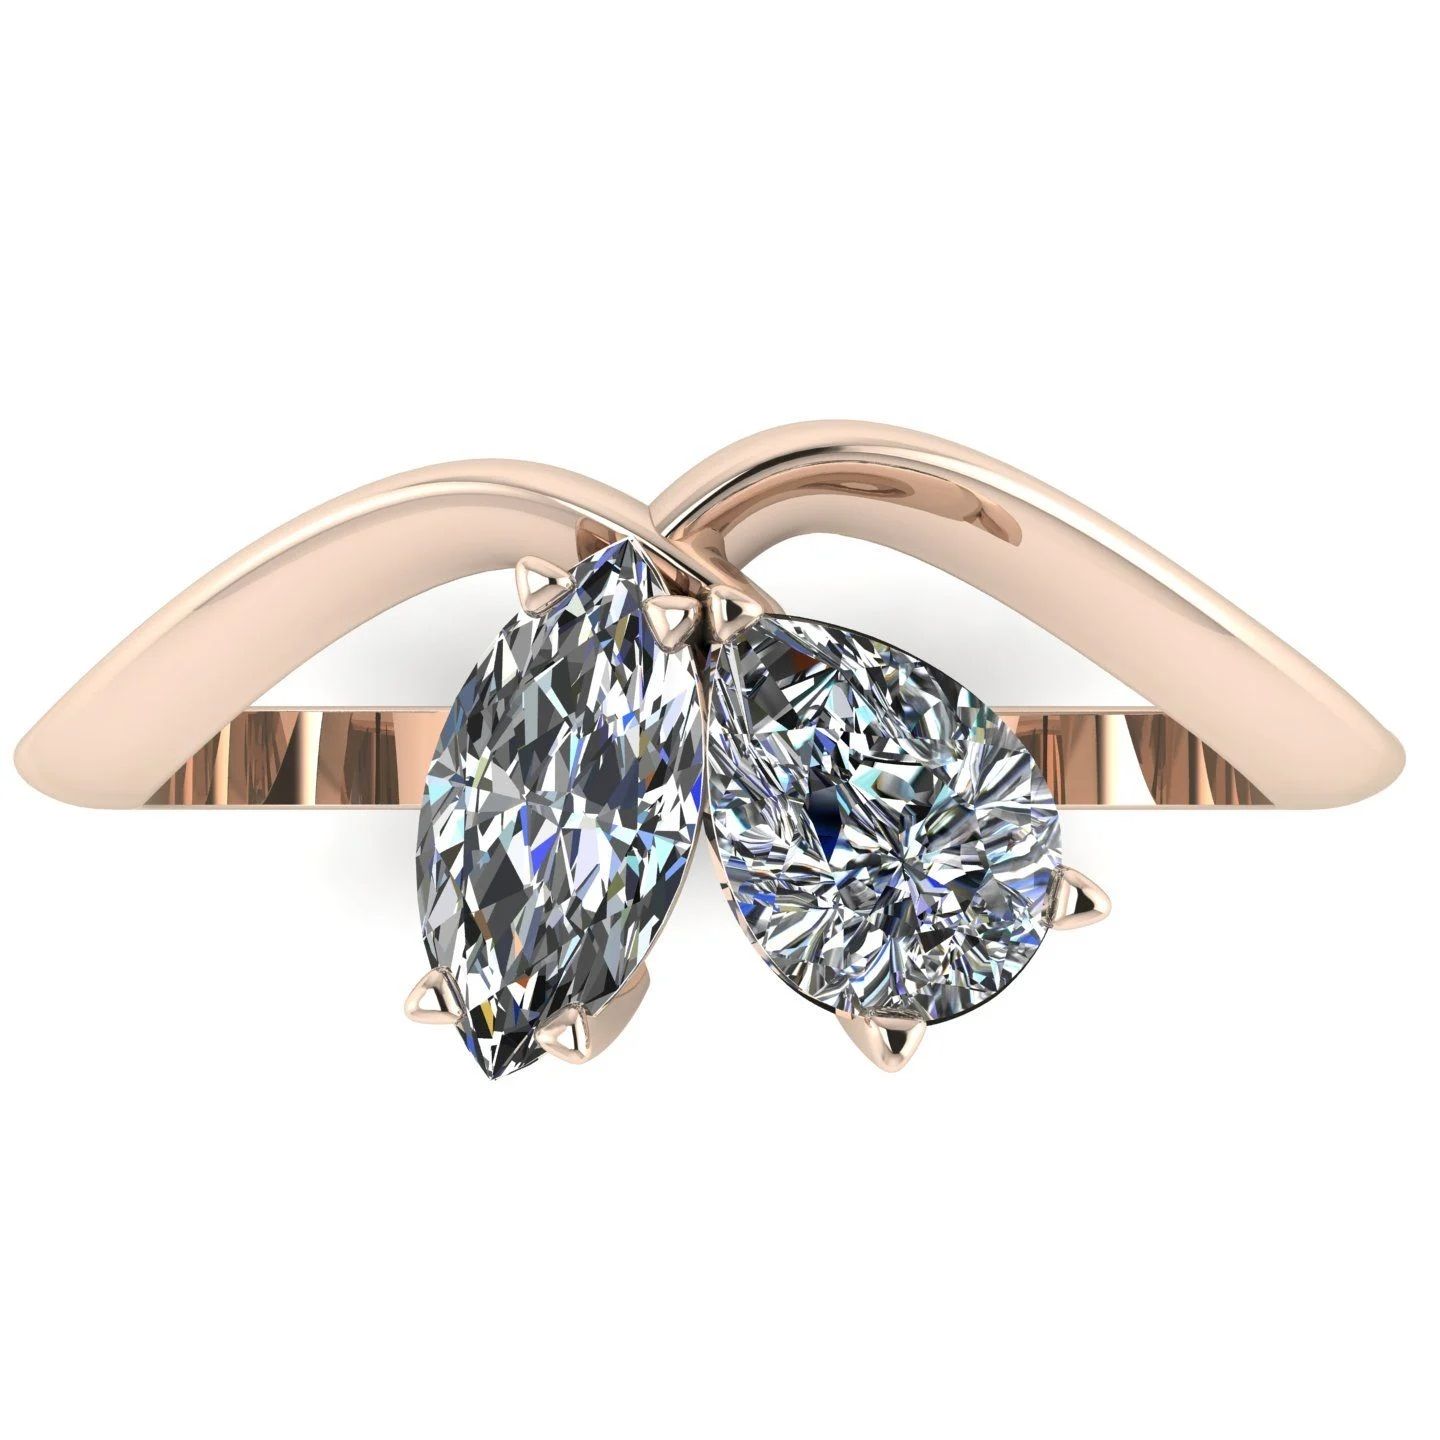 Entwined Rose Gold & Diamond Toi Et Moi Engagement Ring